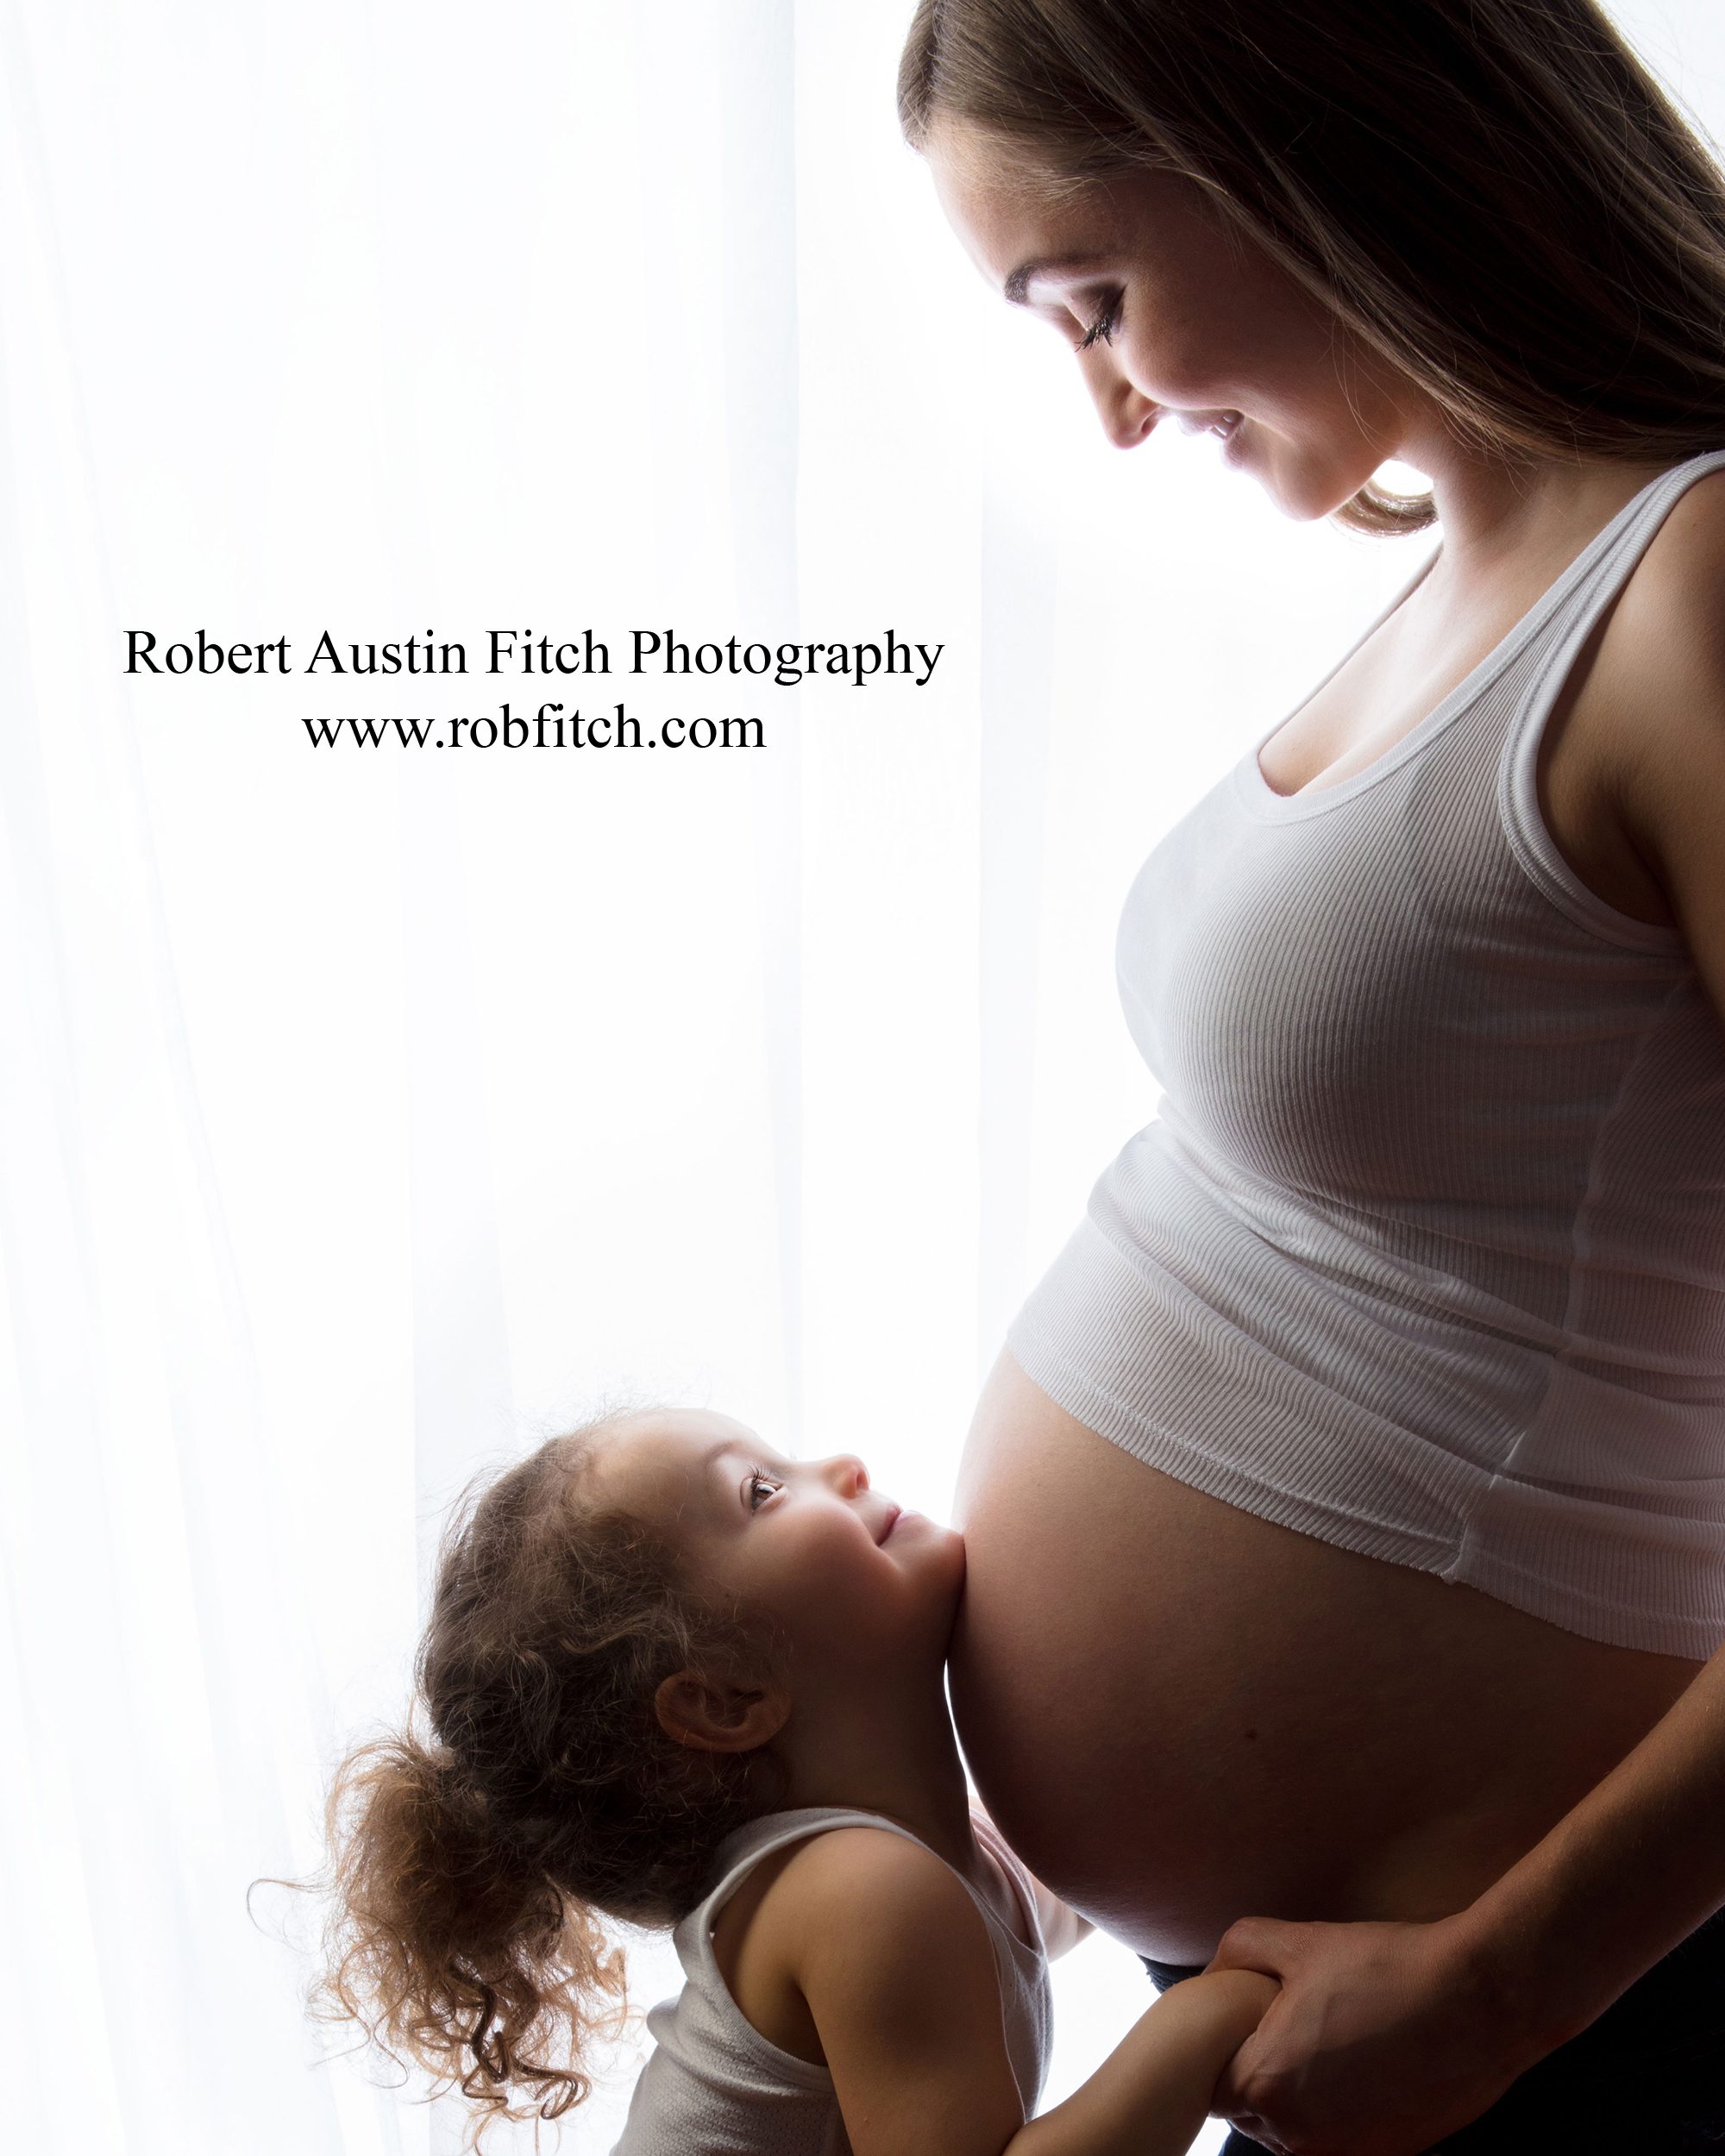 Maternity Photo Shoot Ideas Poses with Daughter